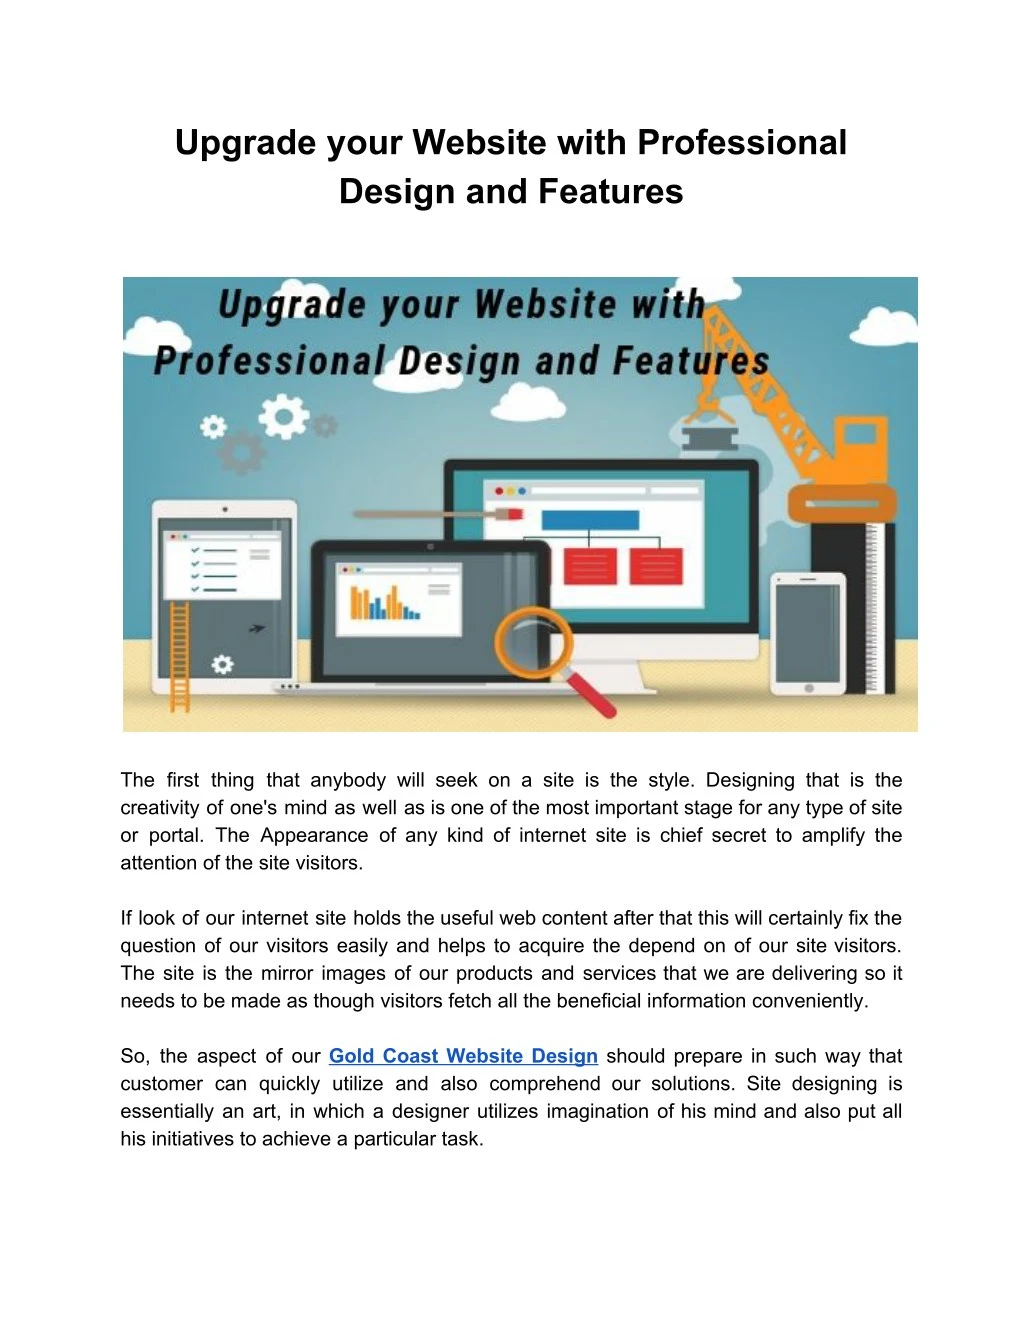 upgrade your website with professional design